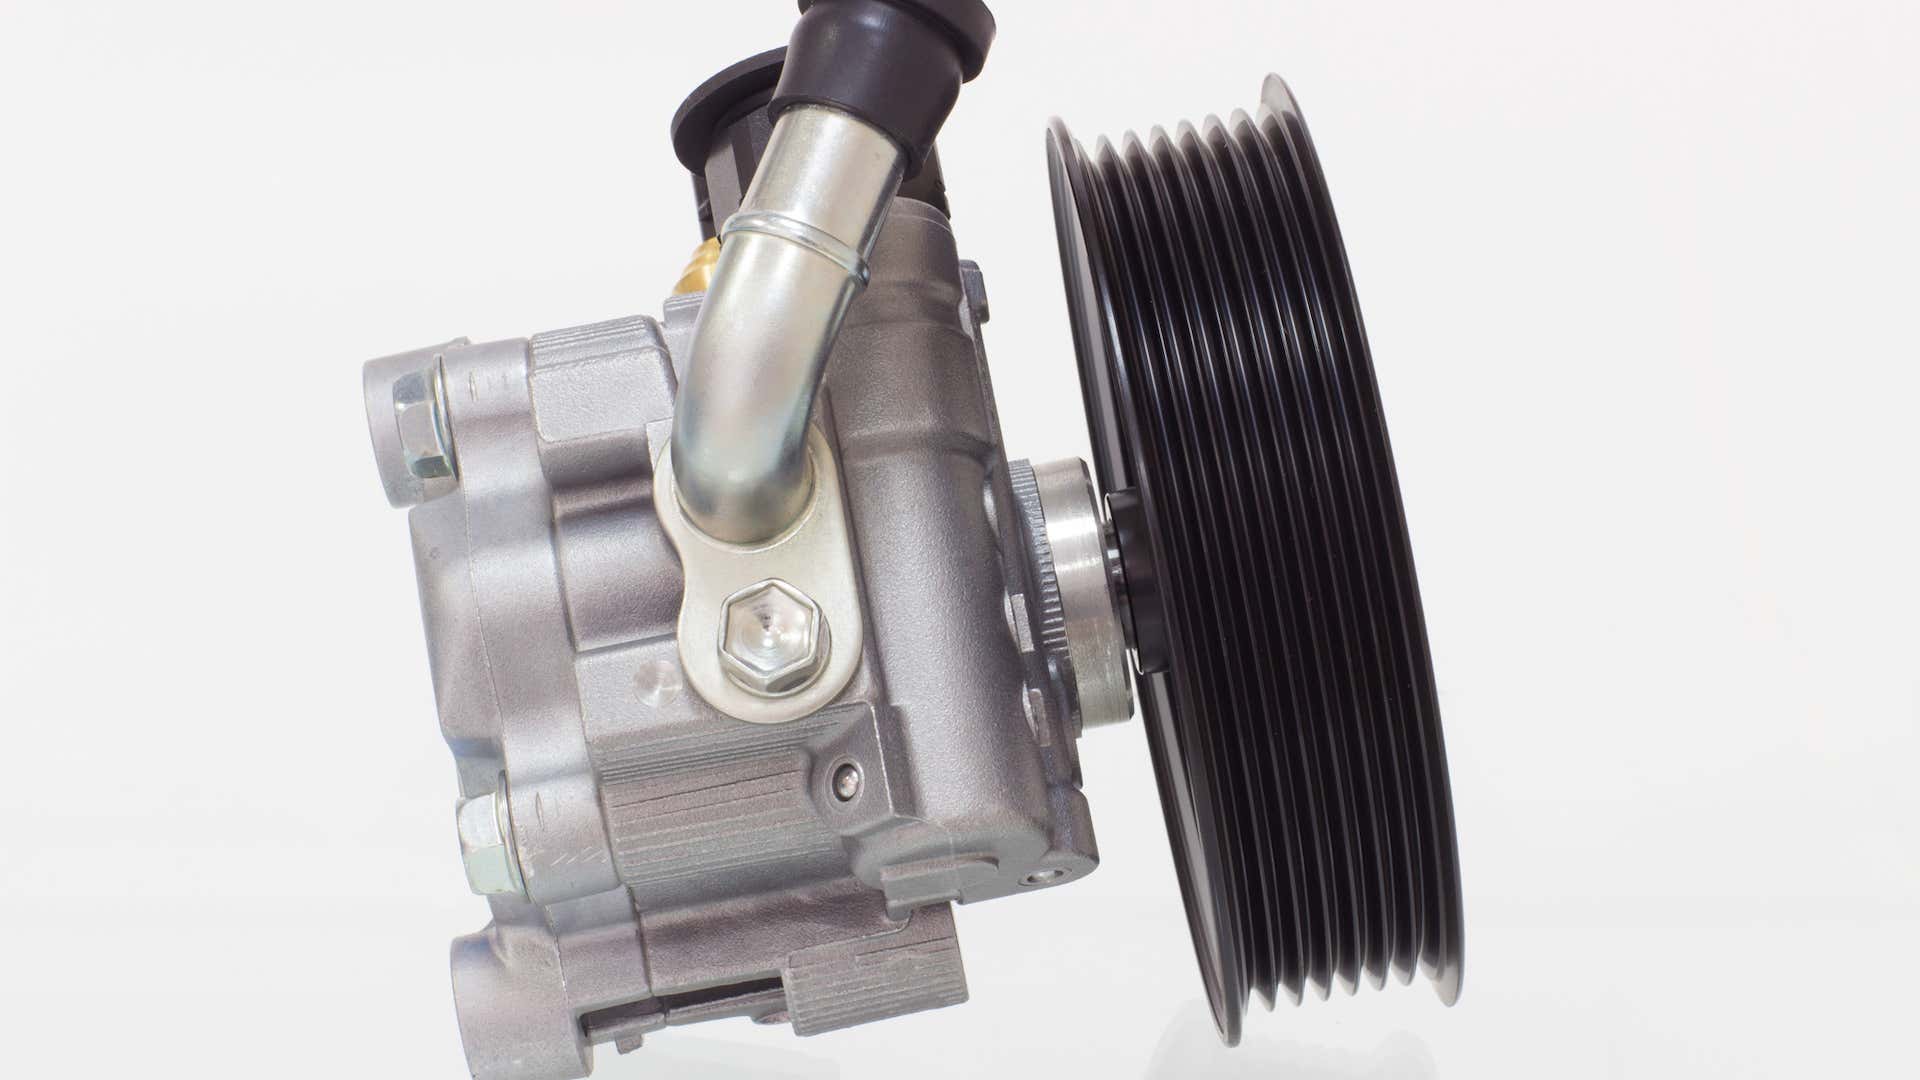 Power steering pumps come in different forms.